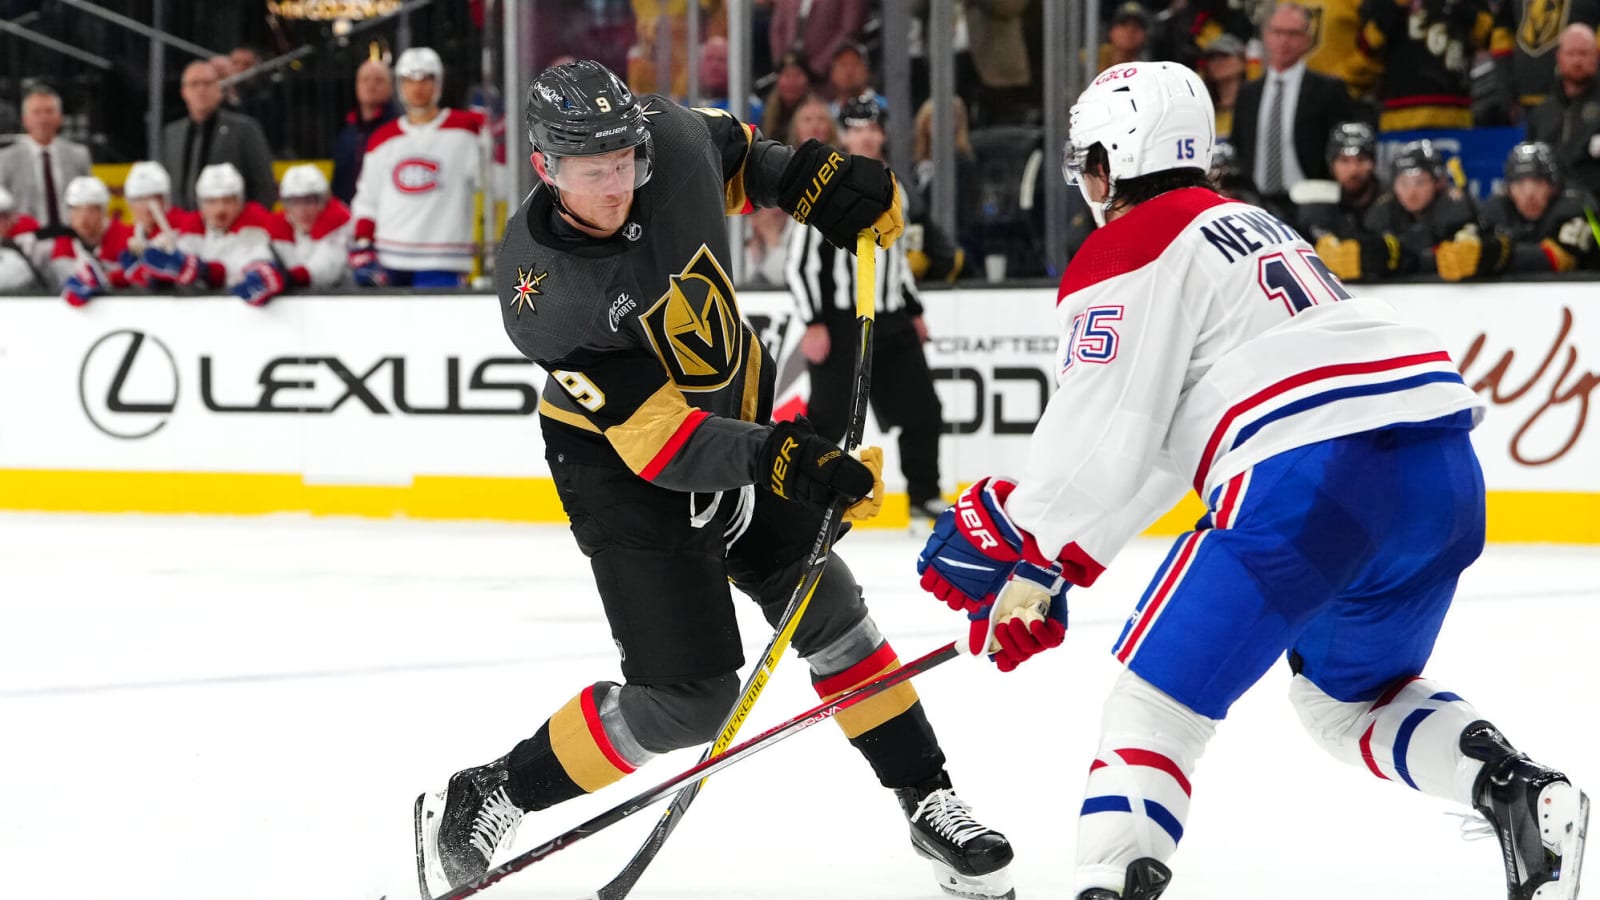 Canadiens Push Golden Knights To Limit In Entertaining Game